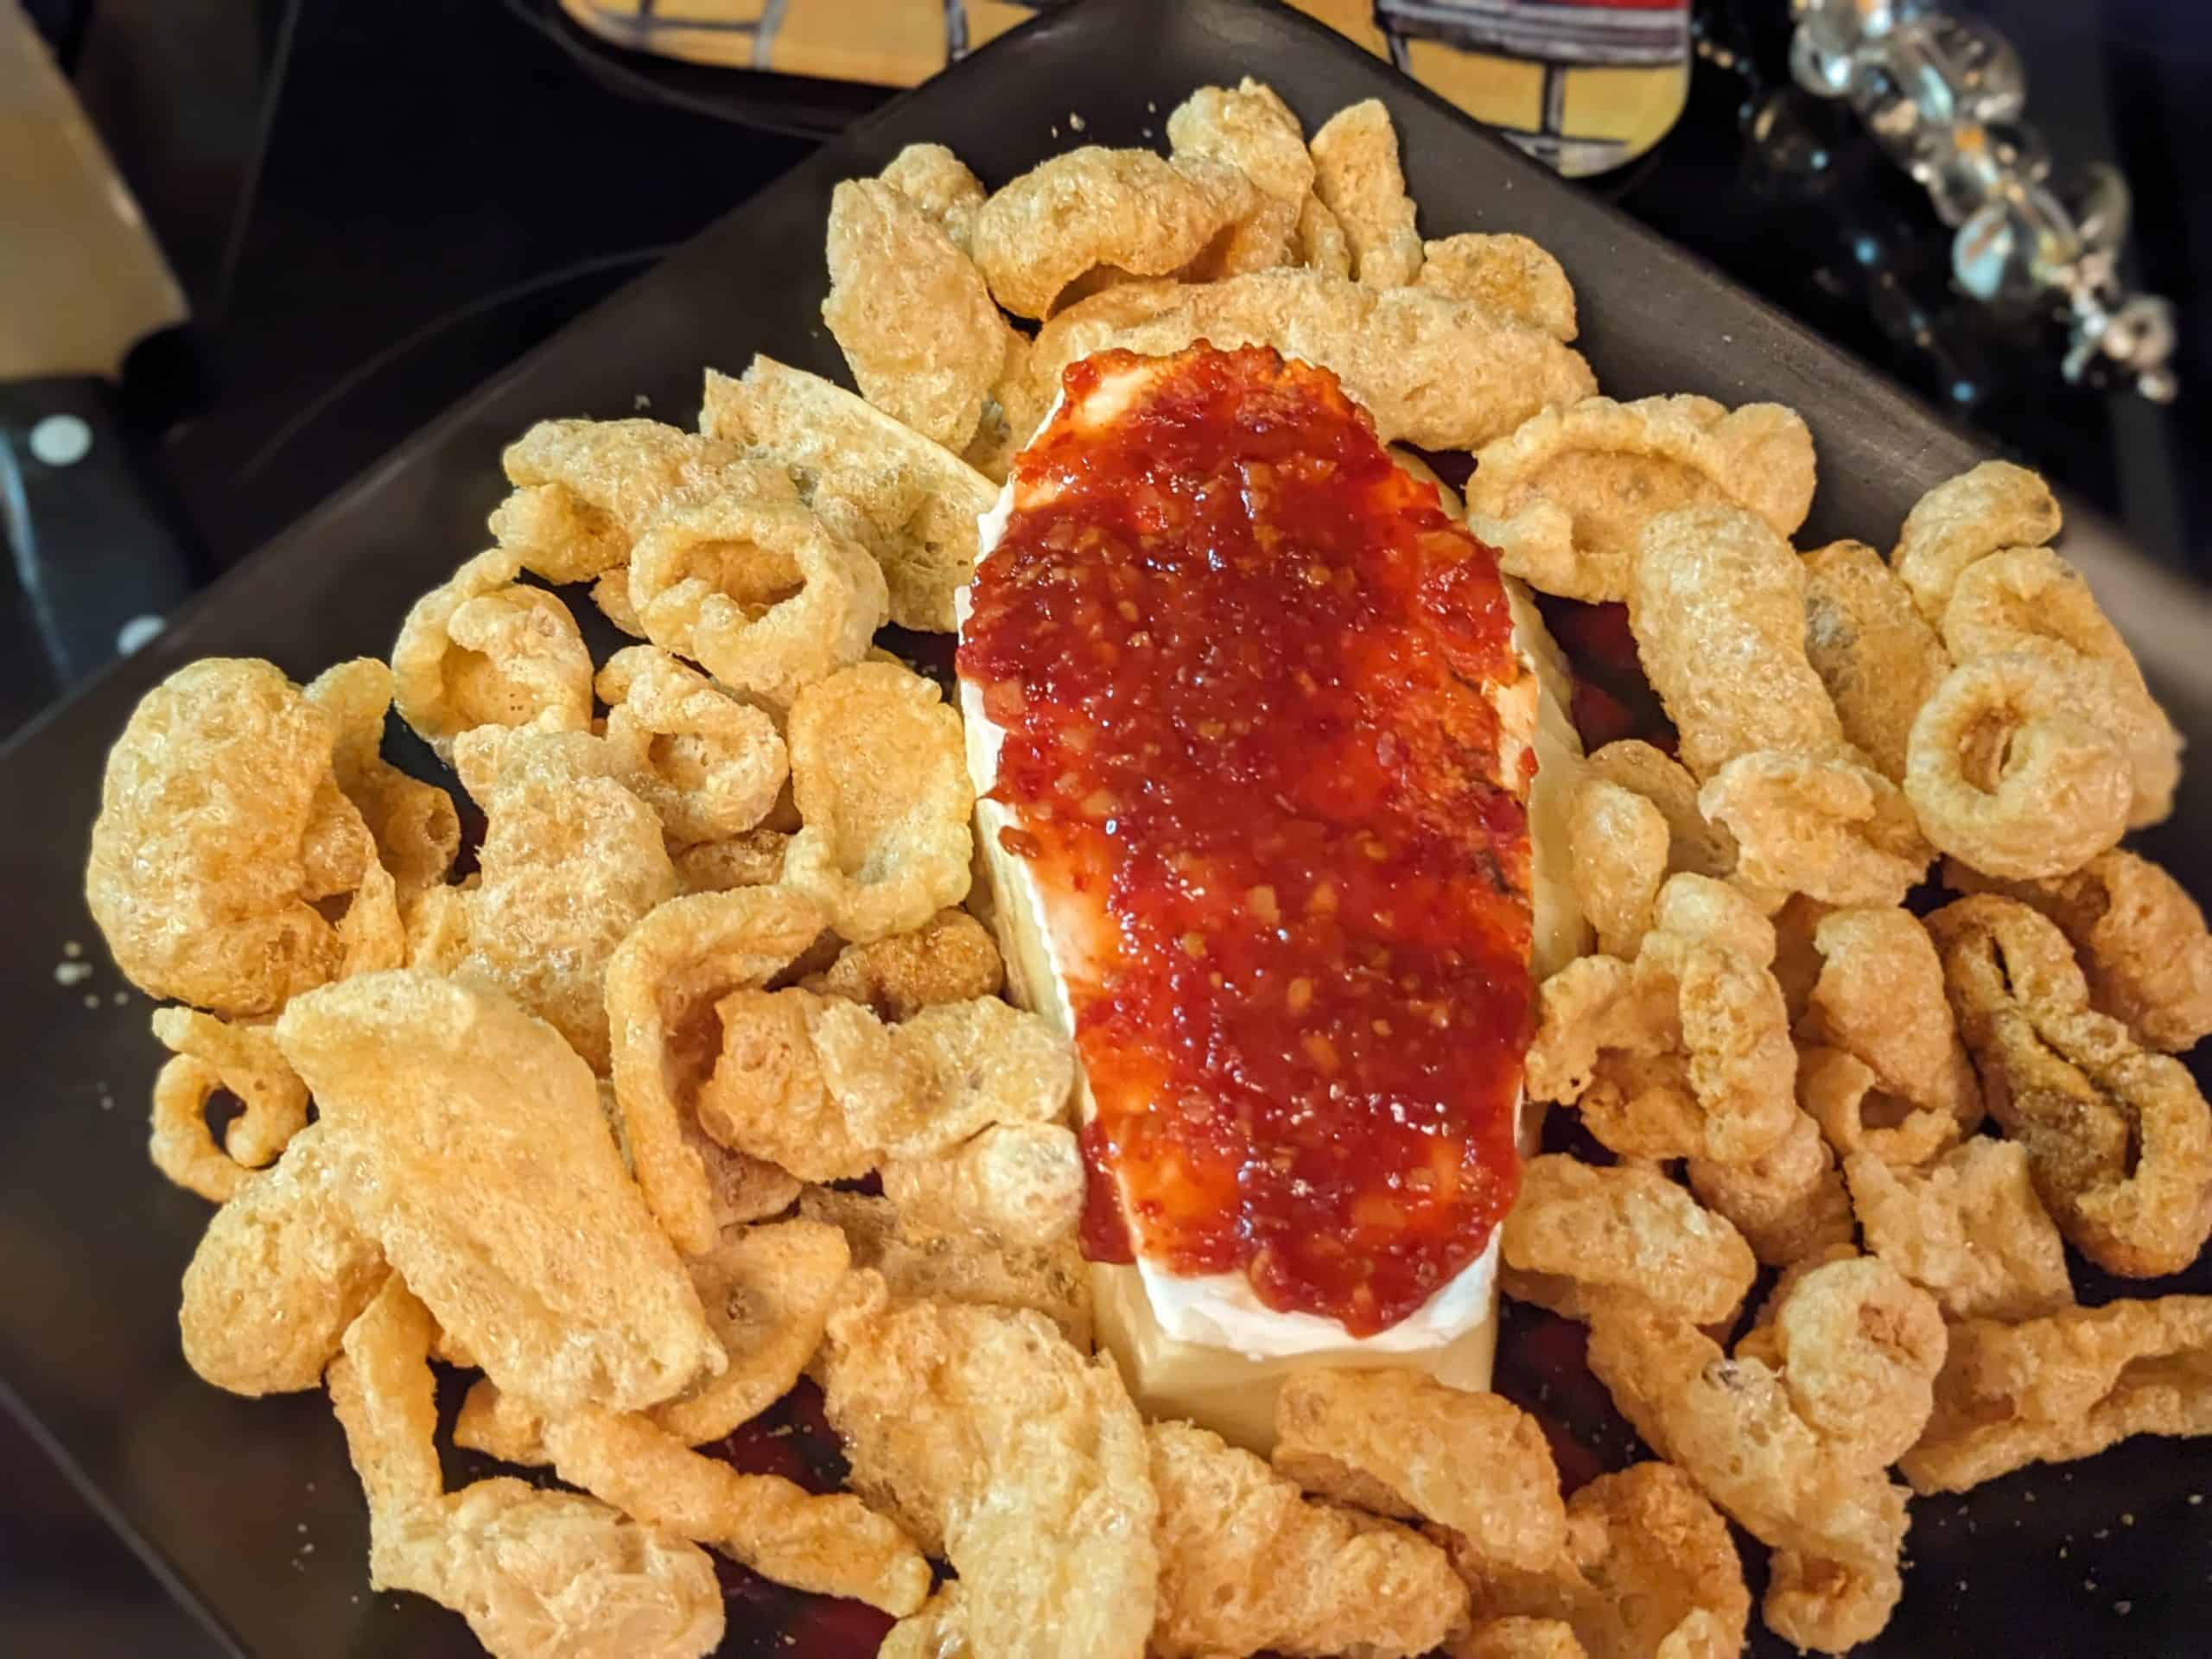 Brie cut in a coffin shape and covered with chili garlic sauce on a plate surrounded by pork rinds